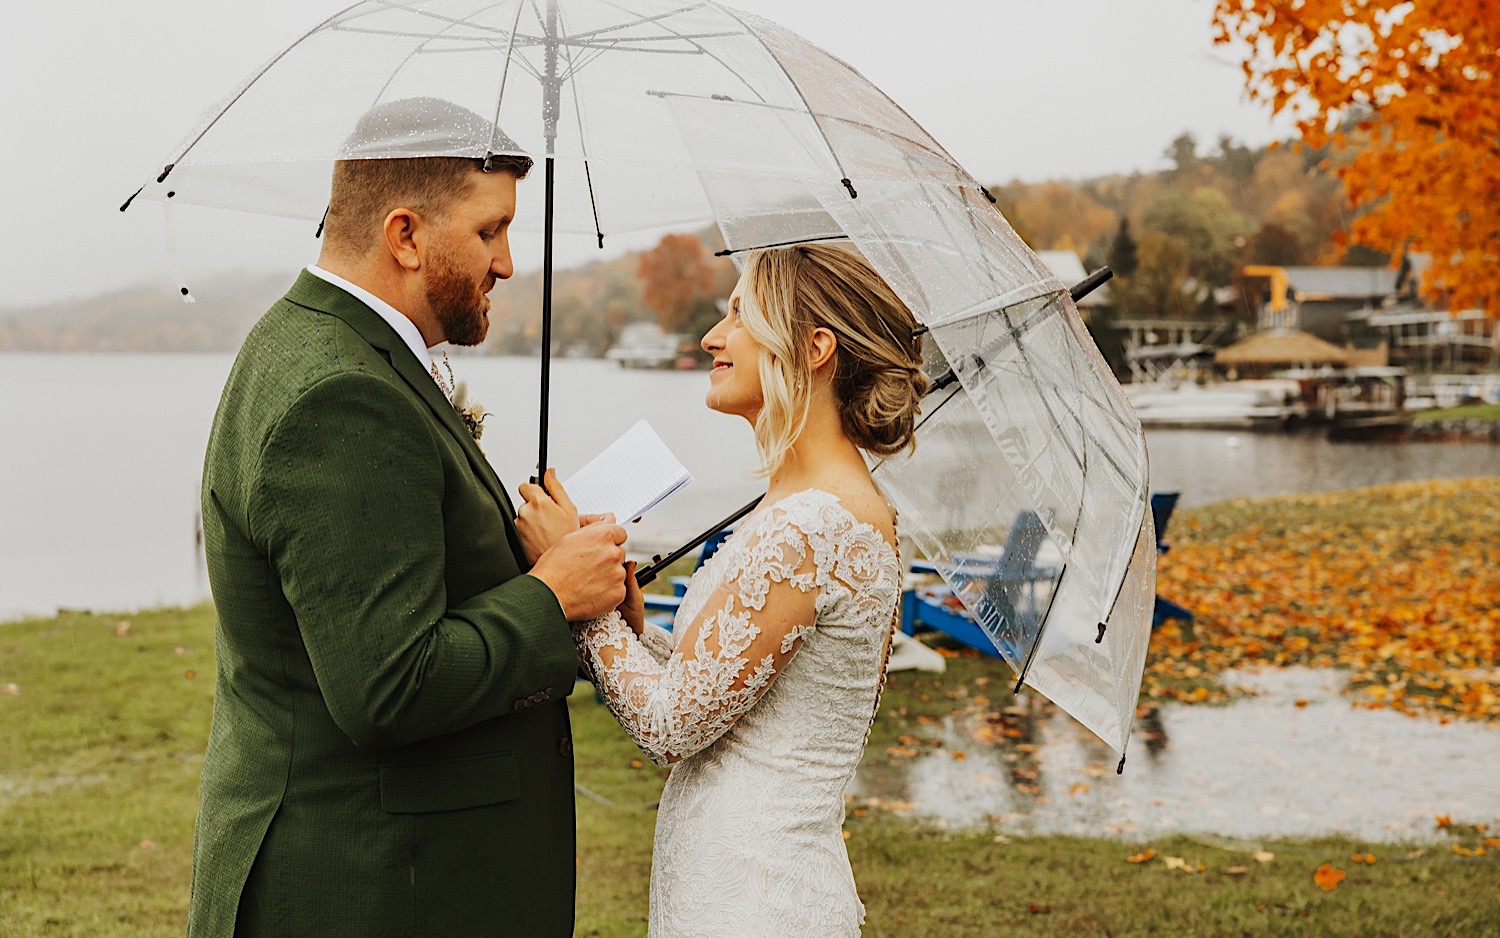 A bride smiles while the groom reads his private vows to her while the two stand under clear umbrellas next to Lake Bomoseen in Vermont